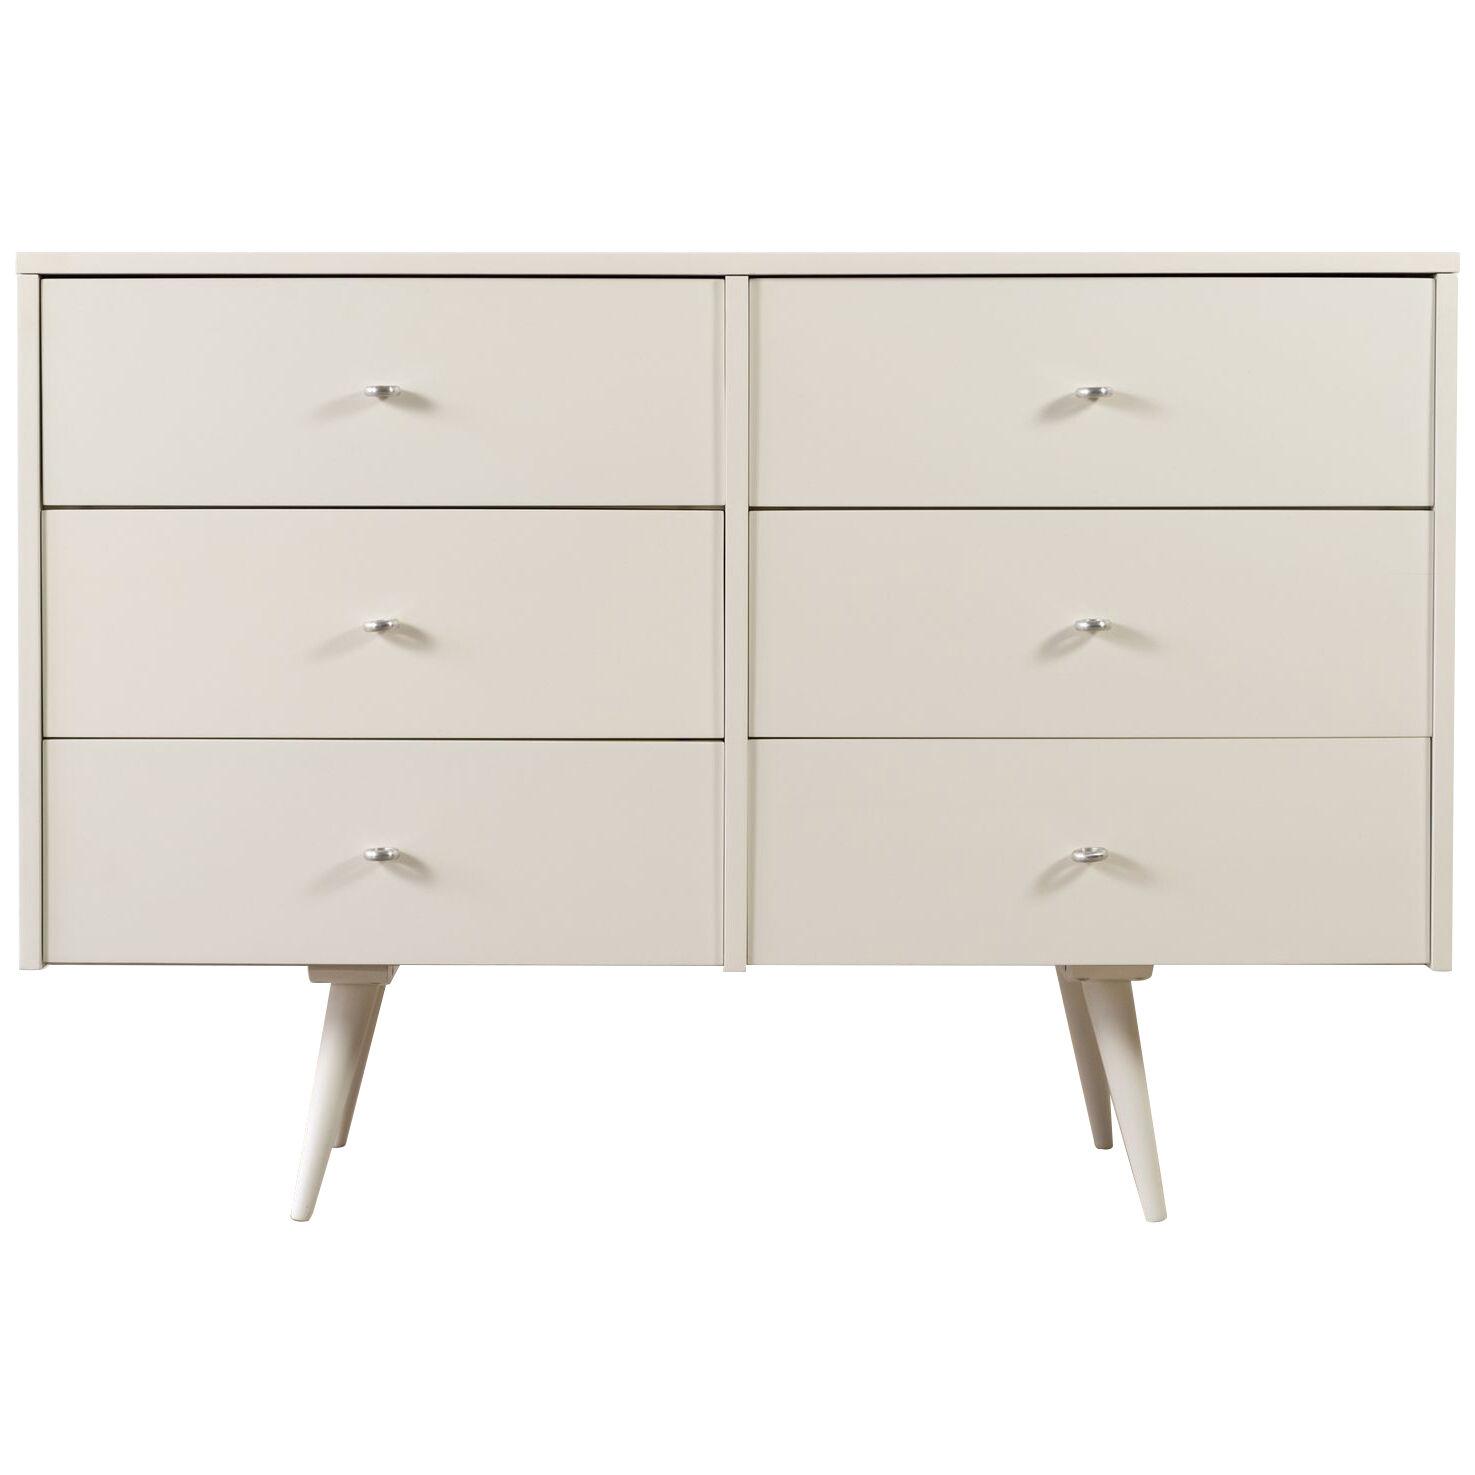 Paul McCobb Dresser in White Lacquer from the Planner Group for Winchendon 1950s